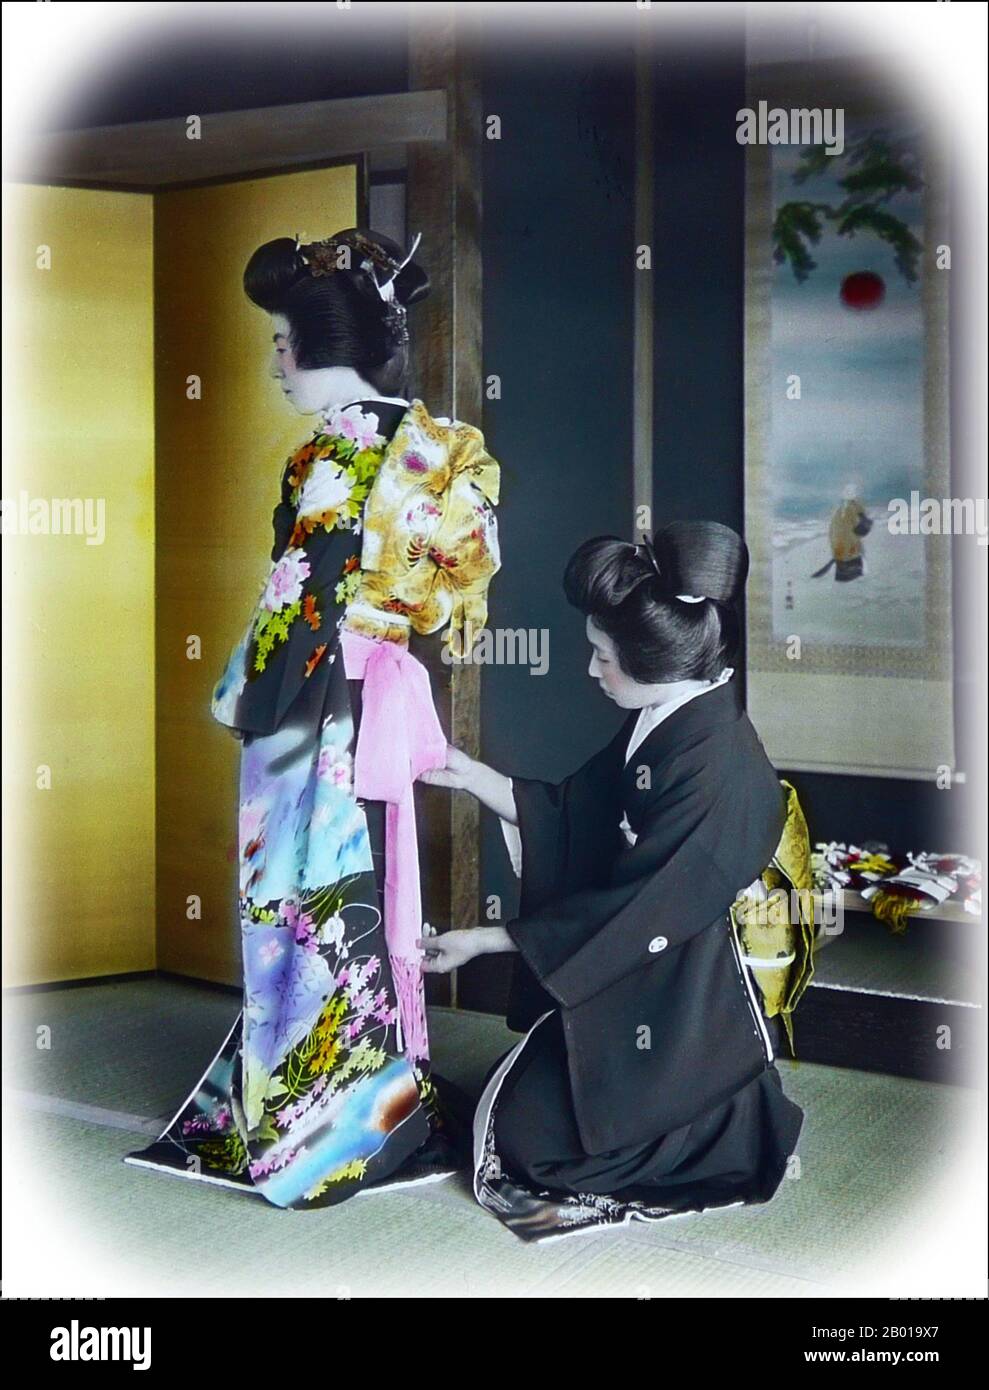 Japan: Woman arranging a kimono on another woman. Photo by T. Enami (1859-1929), c. 1895.  T. Enami (Enami Nobukuni) was the trade name of a celebrated Meiji period photographer. The T. of his trade name is thought to have stood for Toshi, though he never spelled it out on any personal or business document.  Born in Edo (now Tokyo) during the Bakumatsu era, Enami was first a student of, and then an assistant to the well known photographer and collotypist, Ogawa Kazumasa. Enami relocated to Yokohama, and opened a studio on Benten-dōri (Benten Street) in 1892. Stock Photo